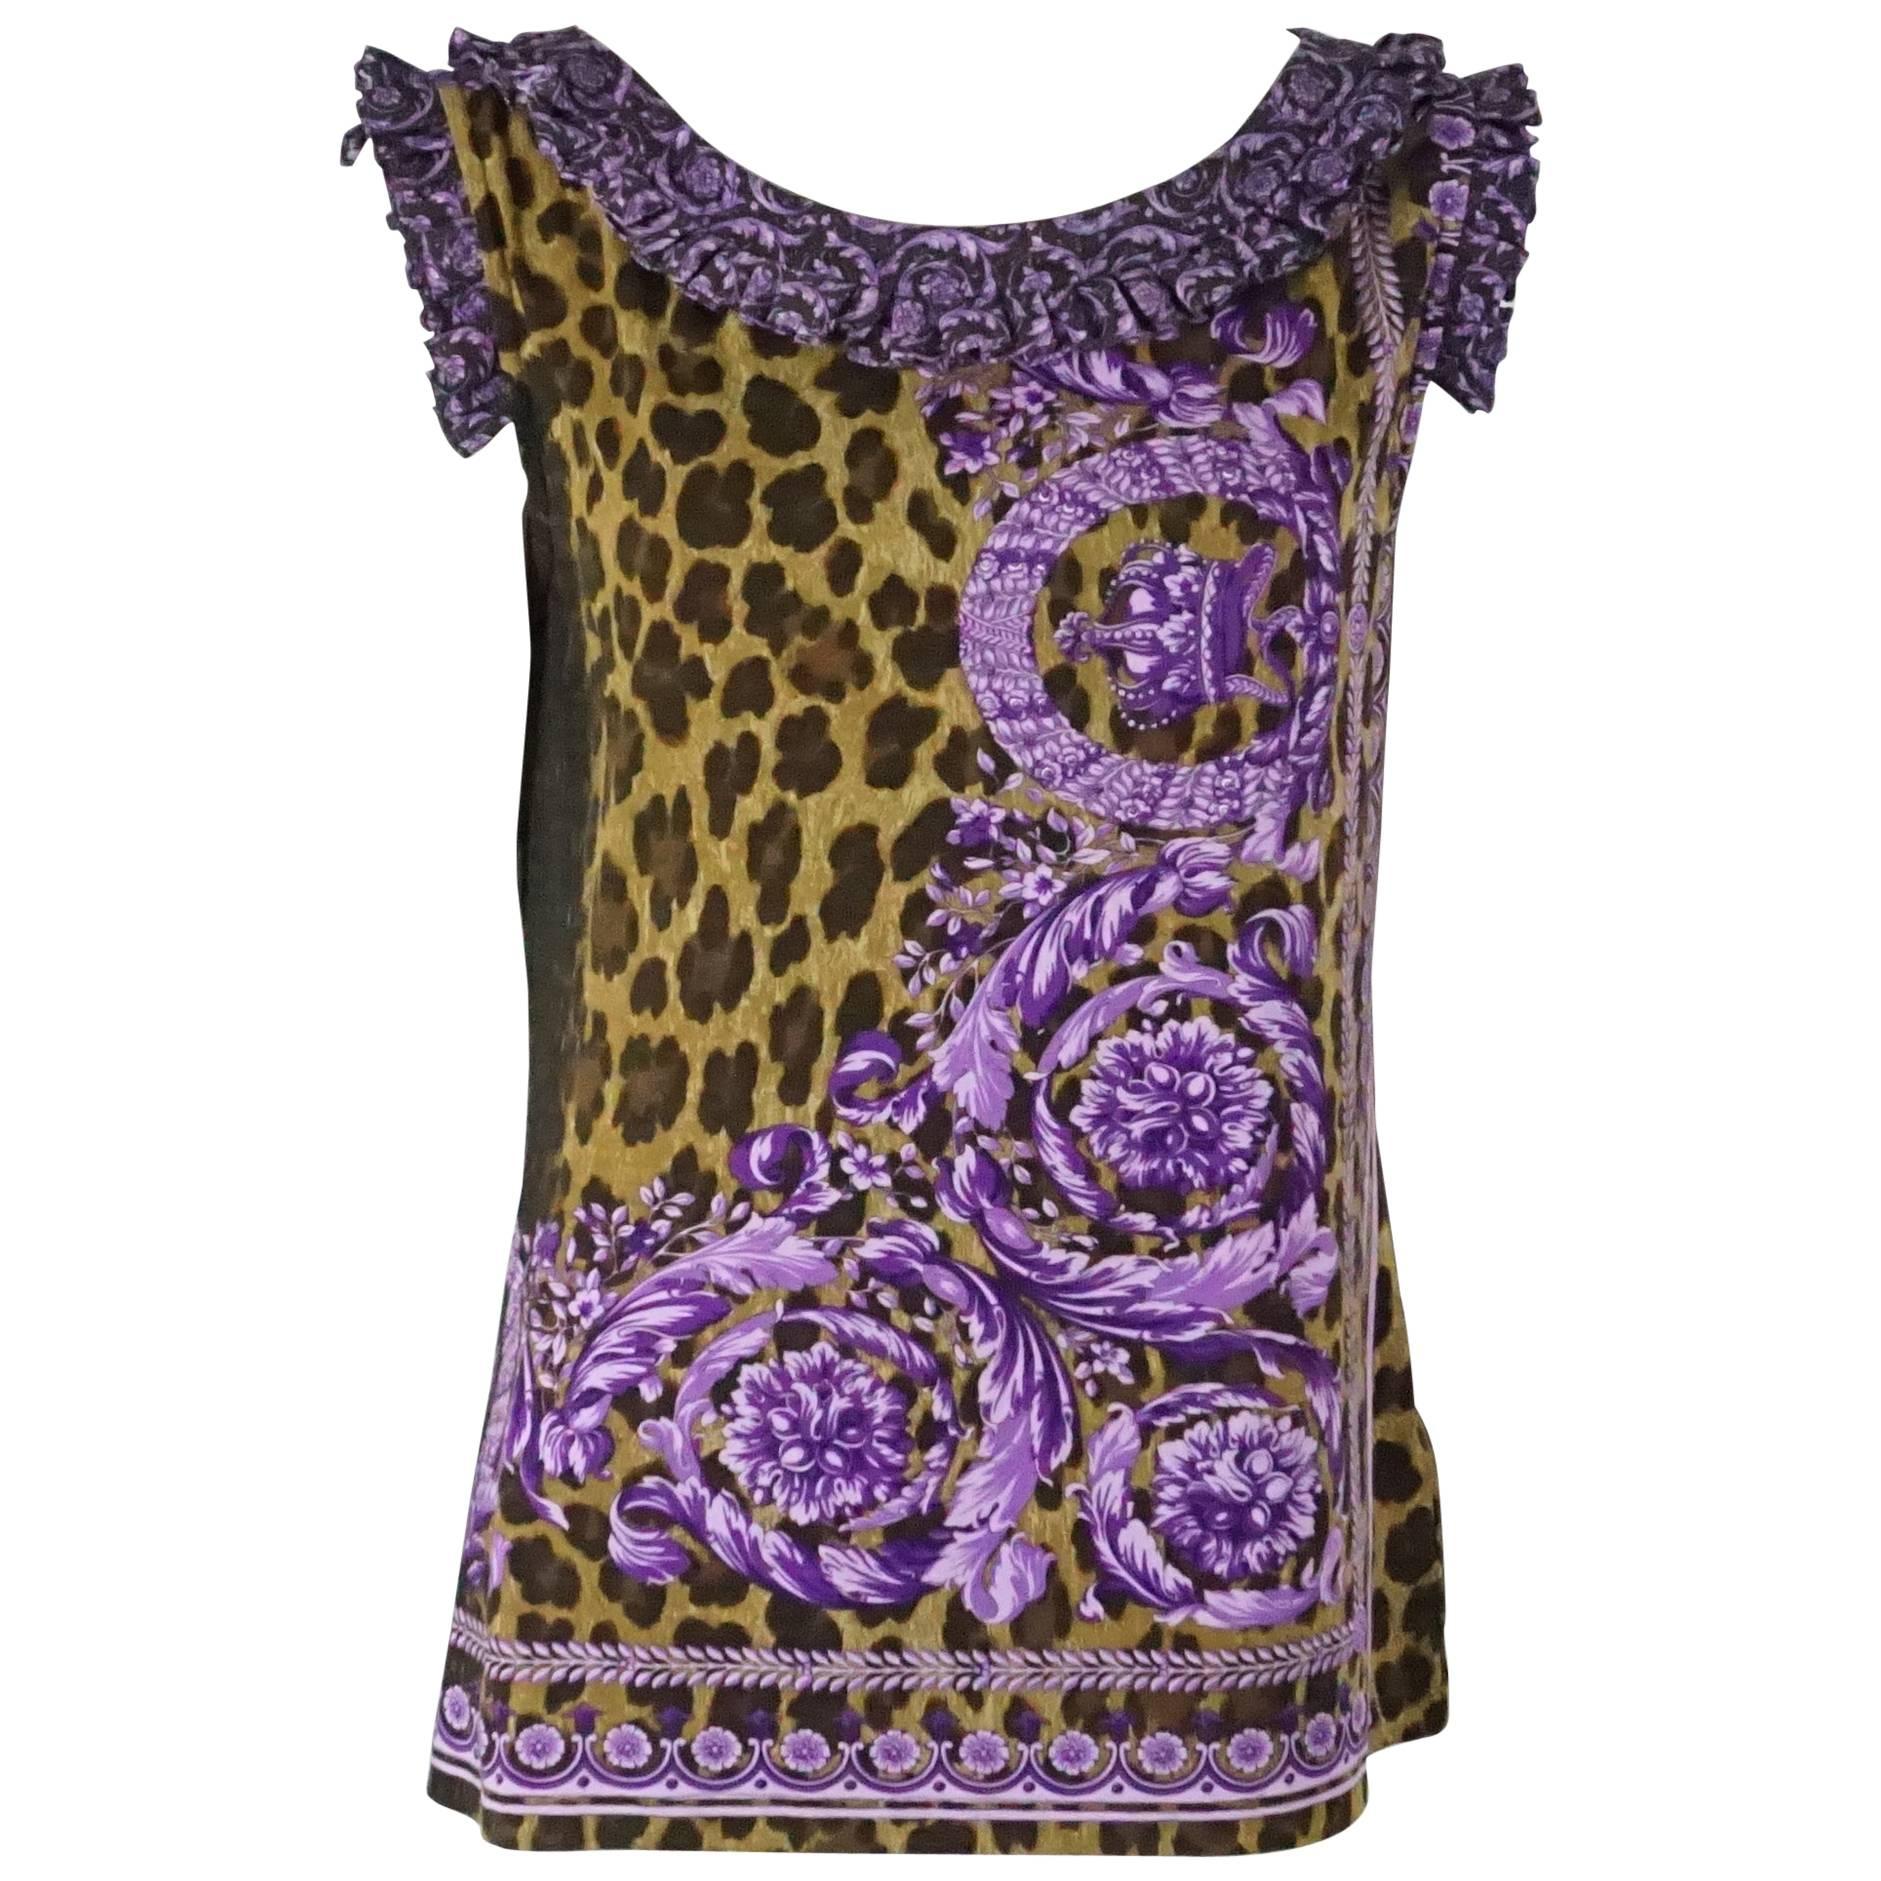 Versace Animal Print and Purple Cotton Top with Ruffles - XL